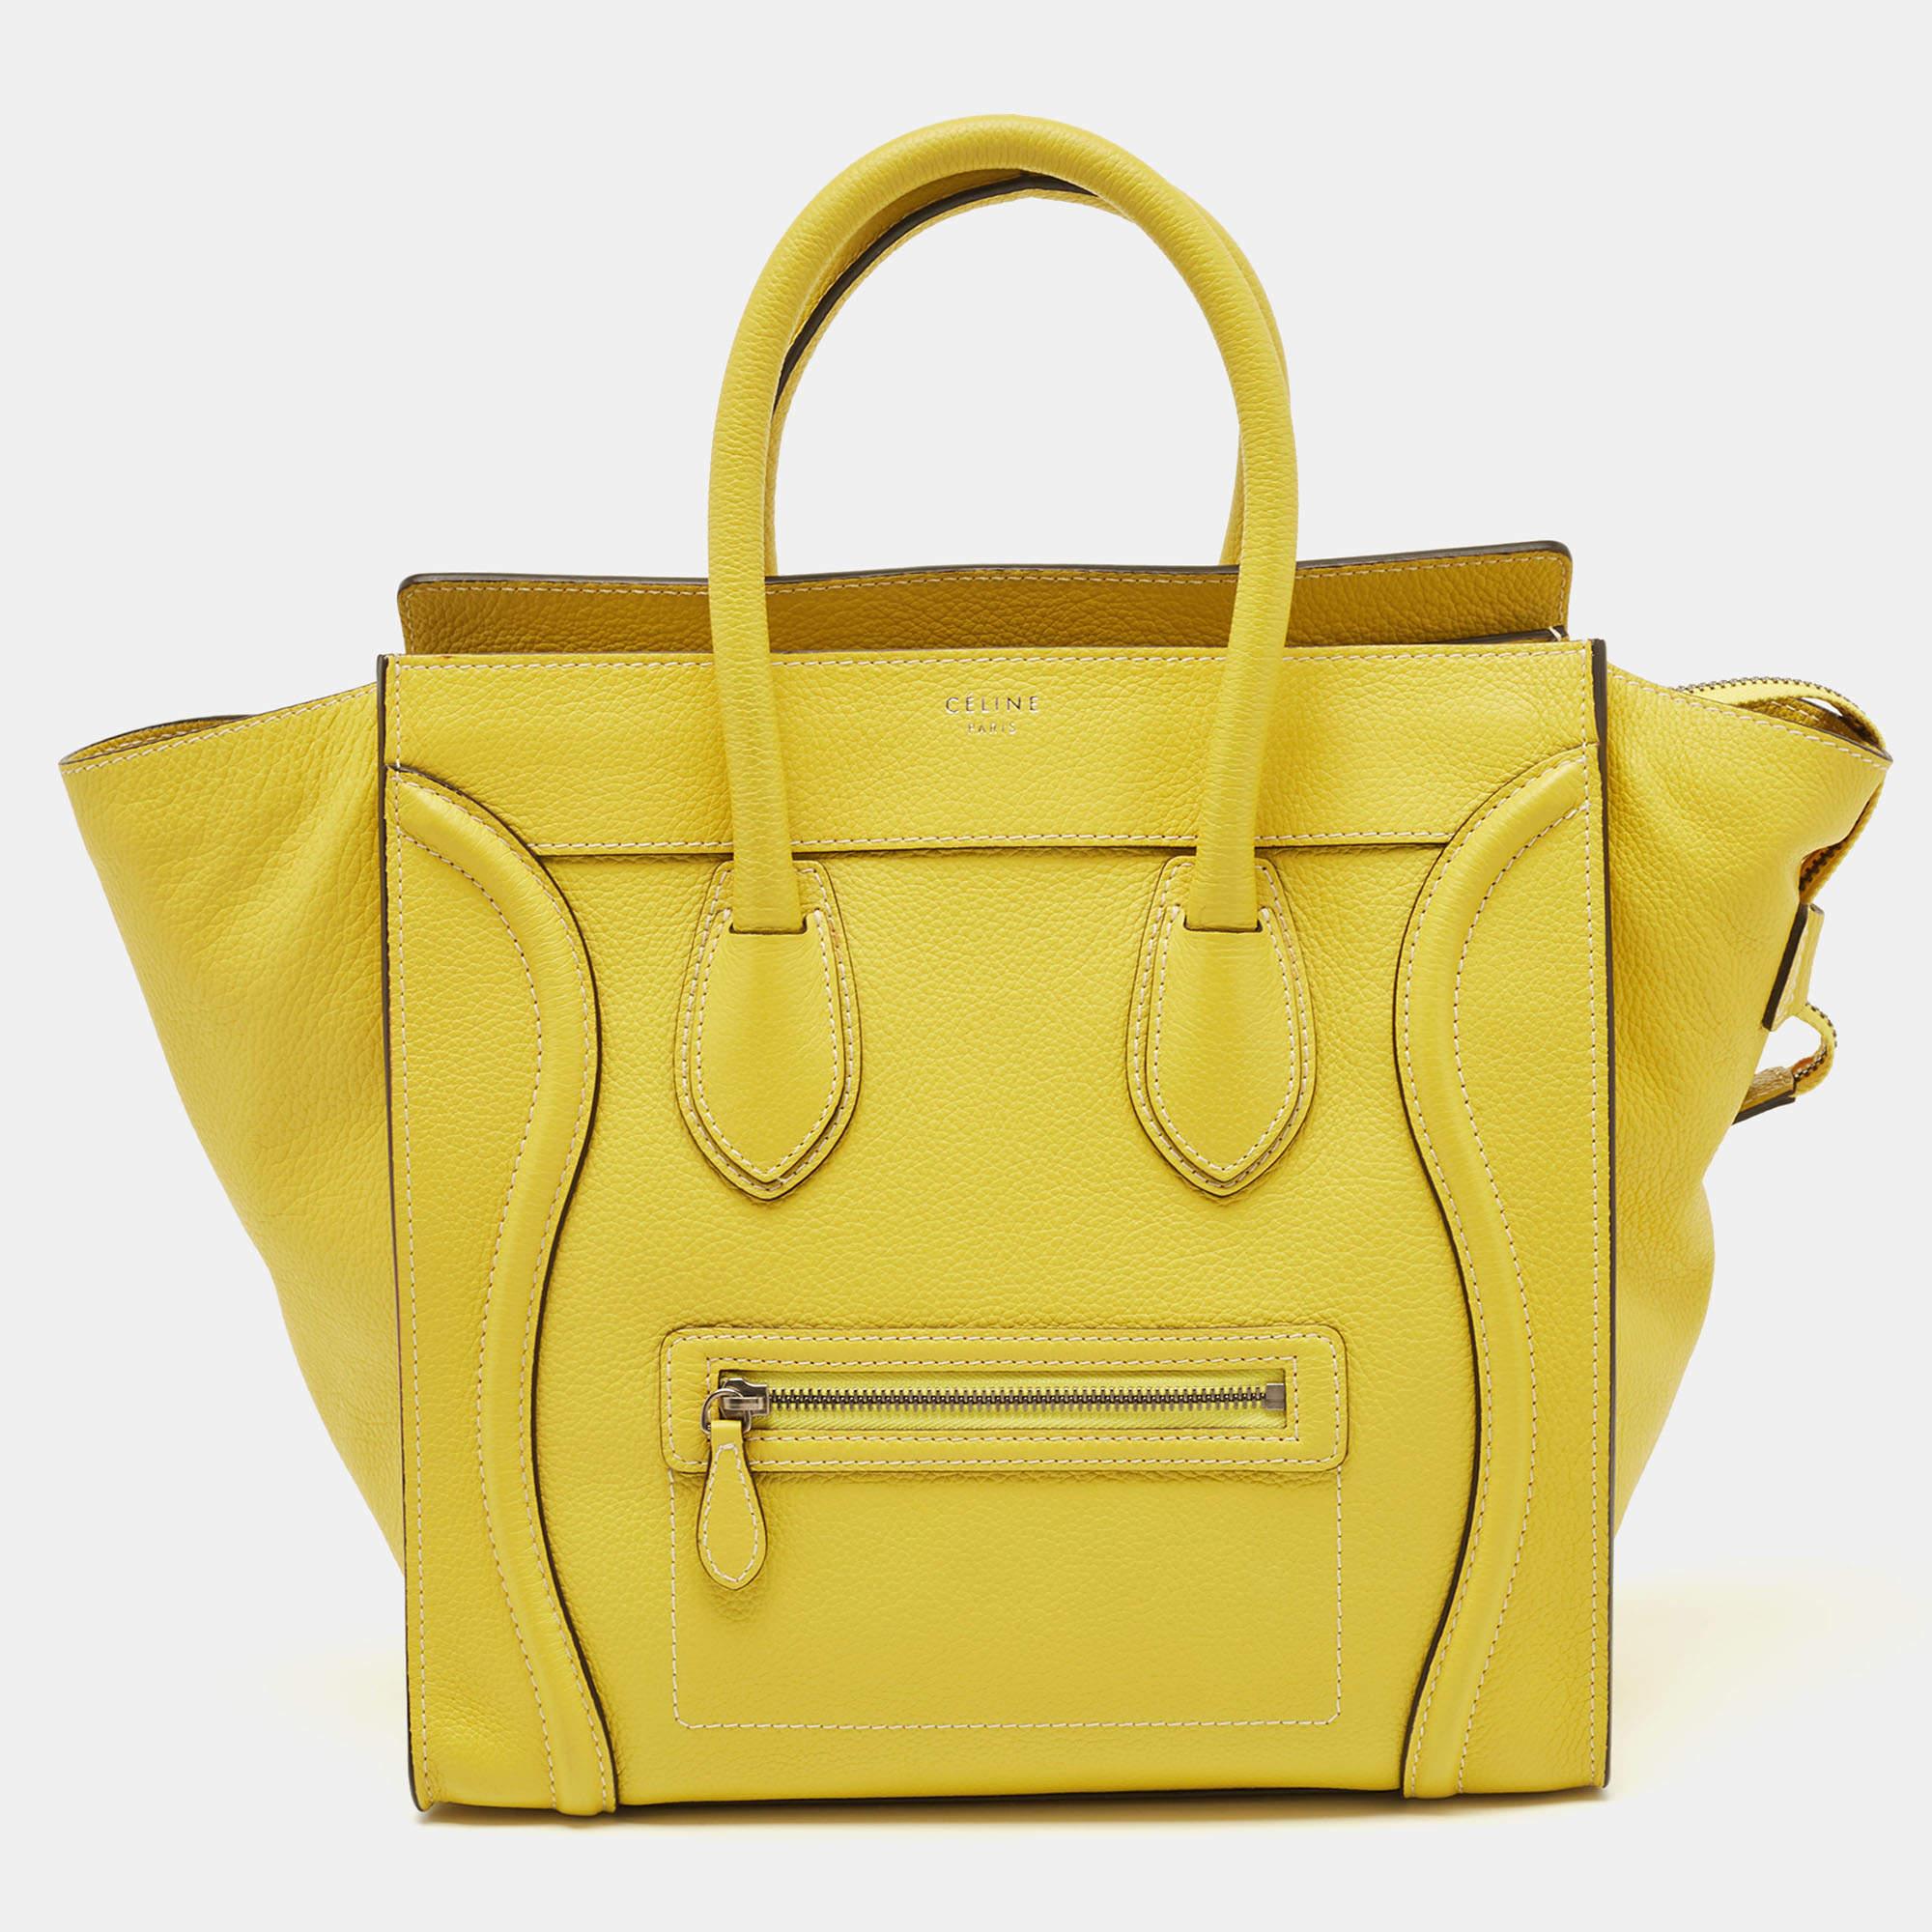 The Céline Luggage tote is a luxurious fashion accessory, featuring a blend of high-quality leather. This compact yet stylish tote showcases a yellow design and is adorned with the discreet Céline logo. It boasts a spacious interior, making it both